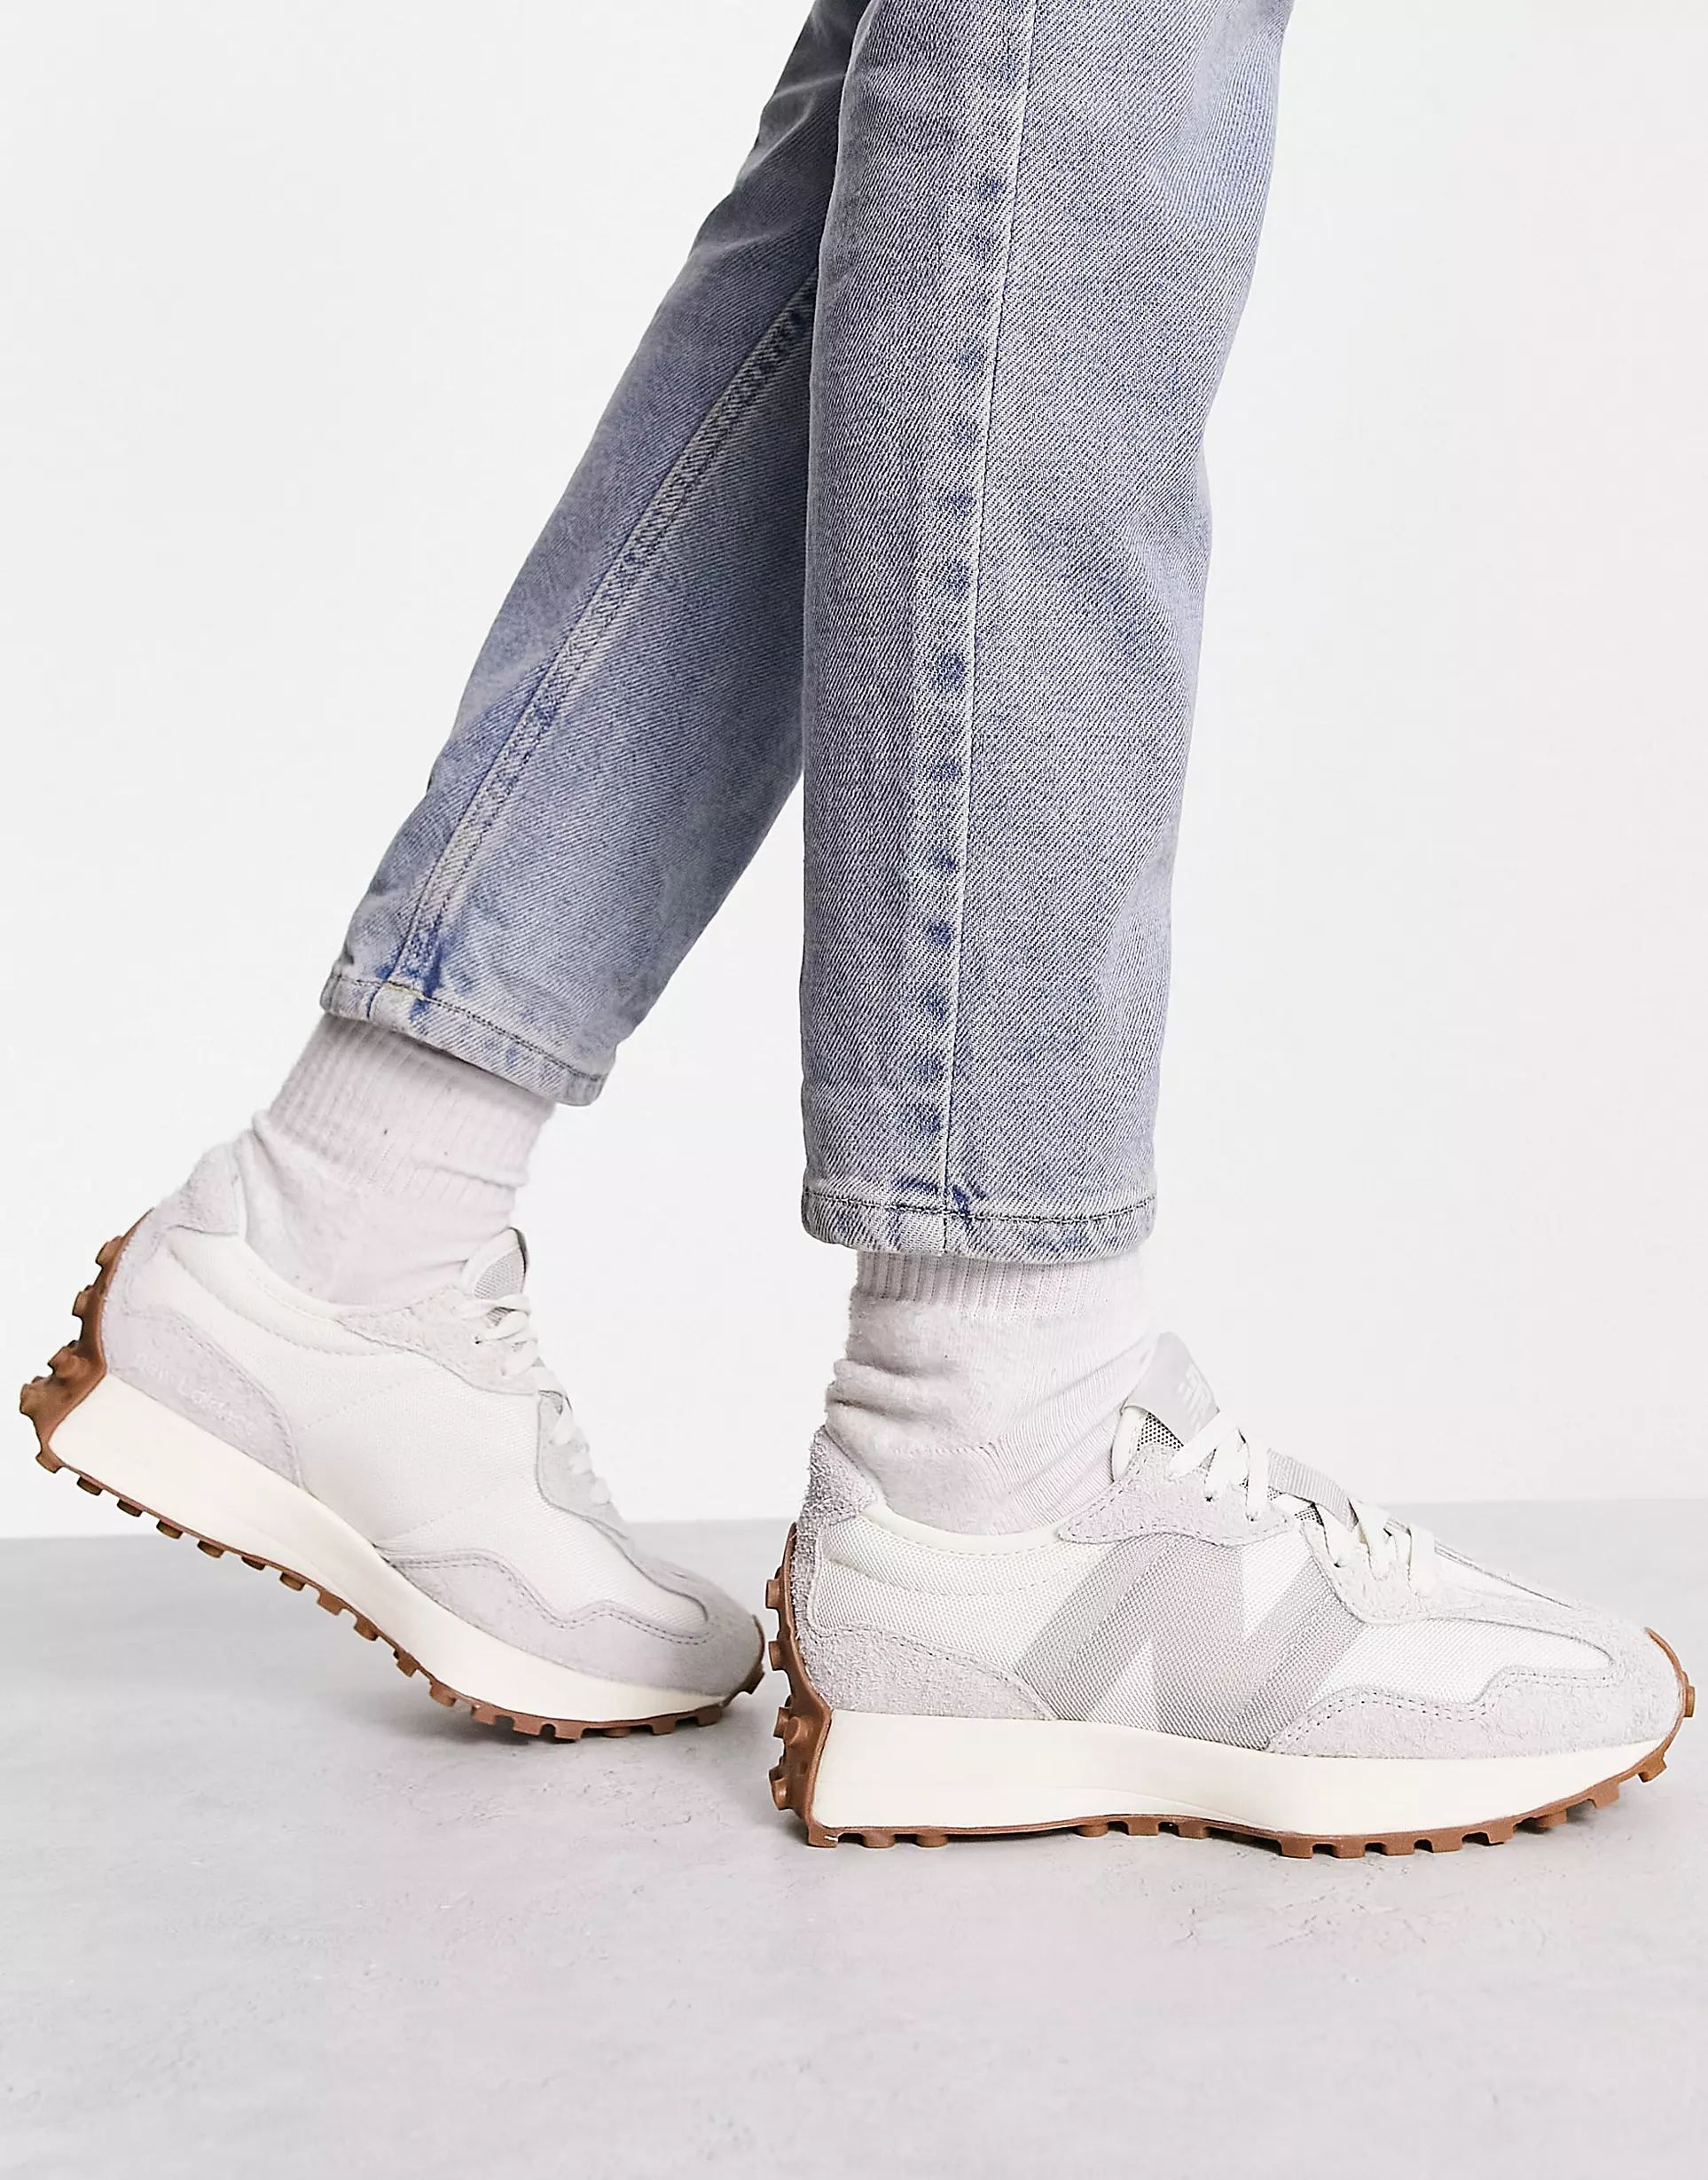 New Balance 327 sneakers in white with gray detail - Exclusive to ASOS | ASOS (Global)